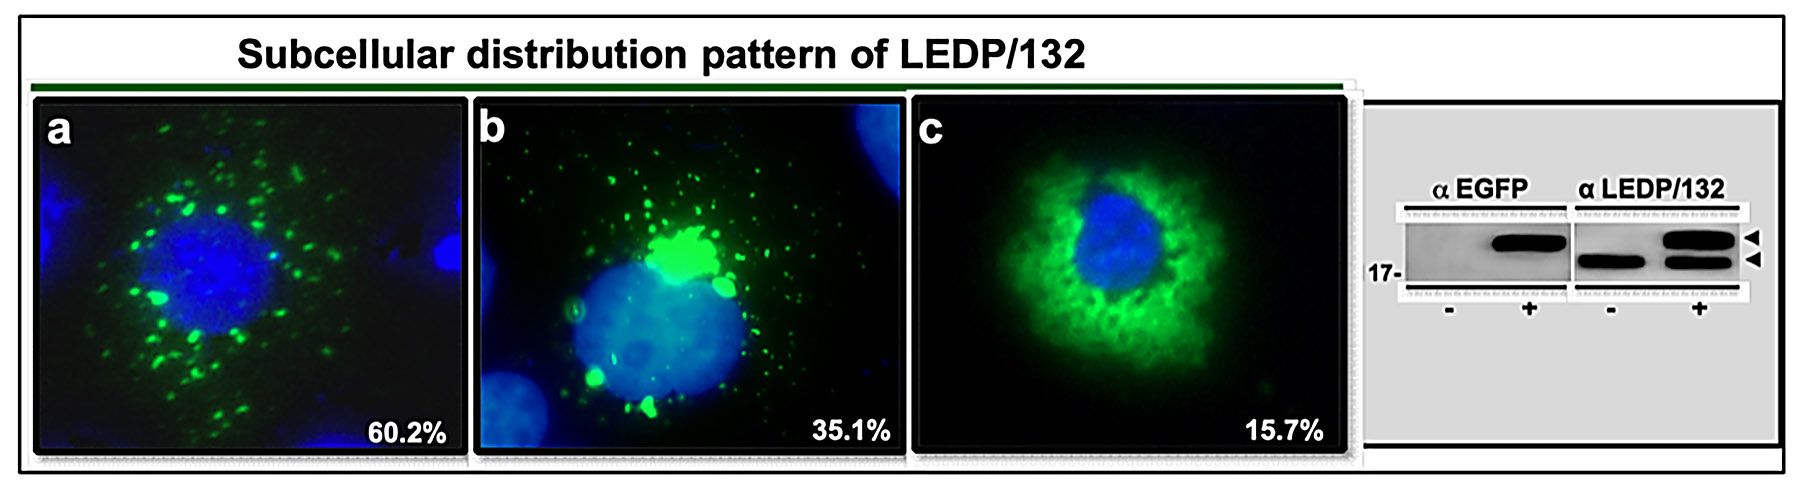 Graphic showing Subcellular distribution pattern of LEDP/132.